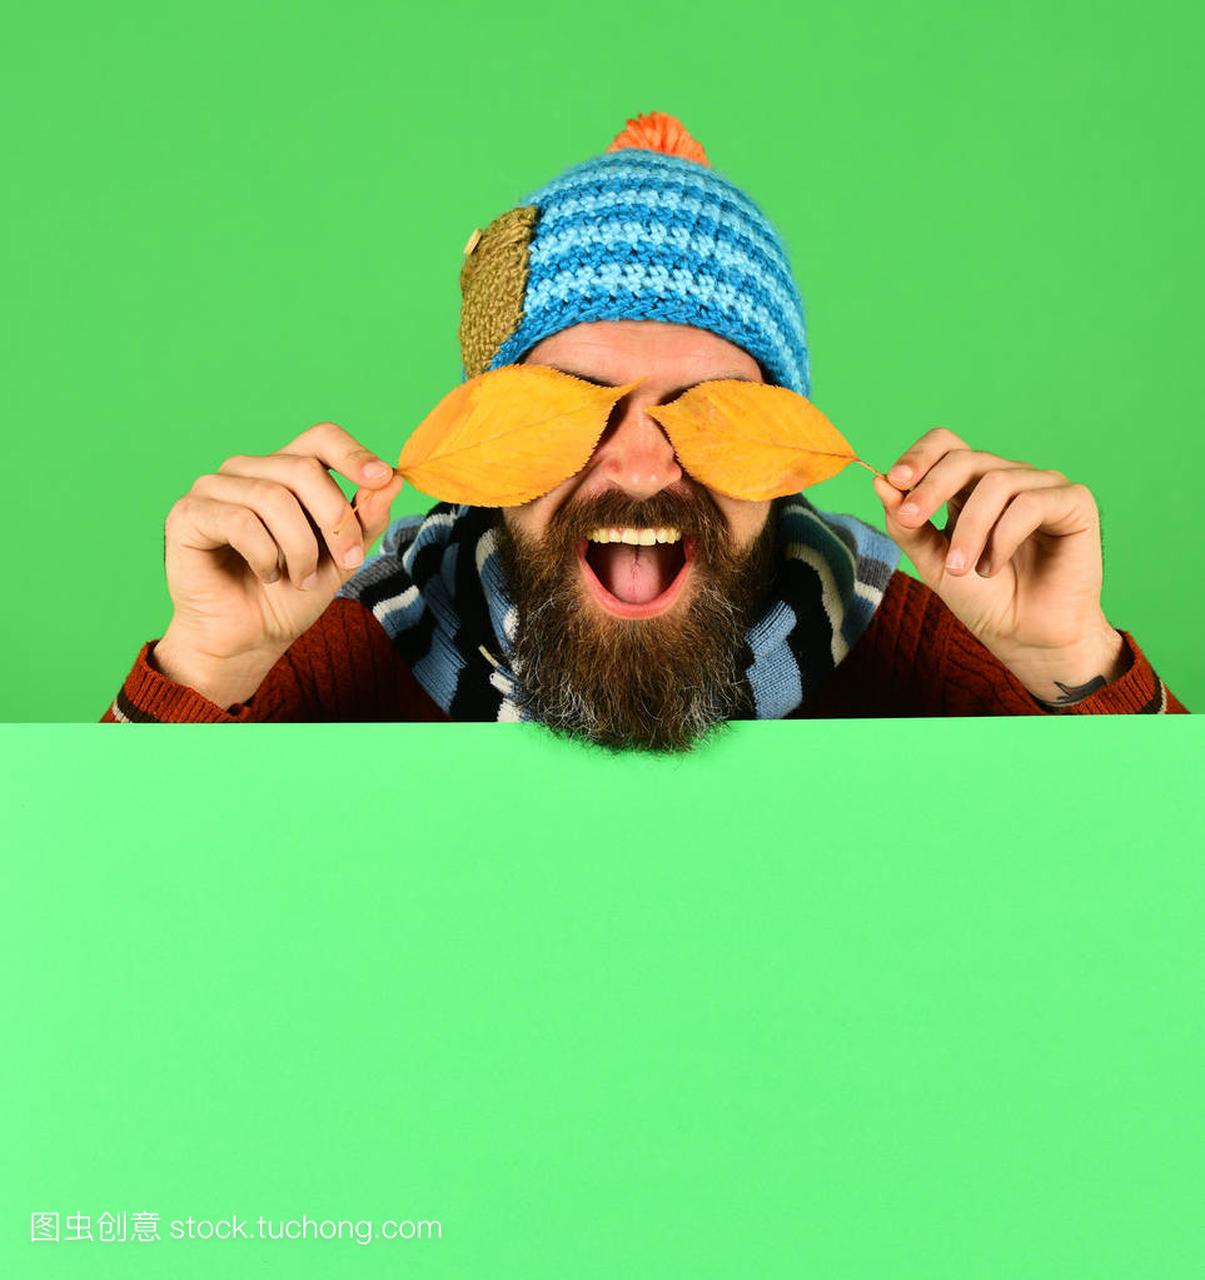 Hipster with beard and laughing face wears wa